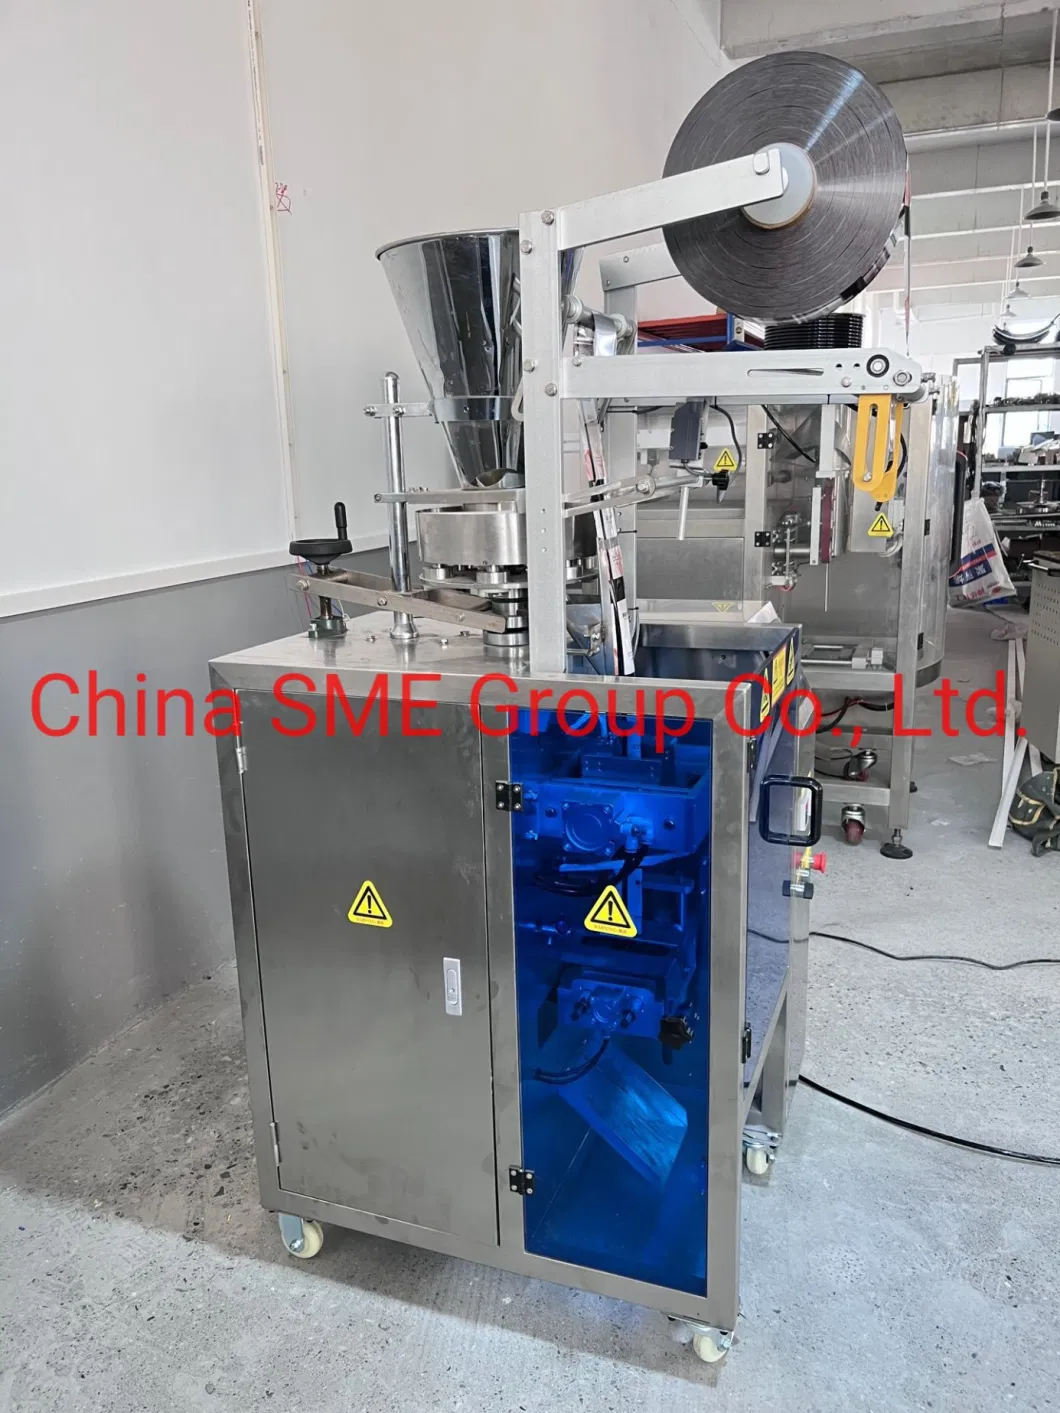 Loose Non-Adhesive Powder, Particle Materials Like Gourmet, Sugar, Soup, Wheat and Drying Agents. Pack Package Machine